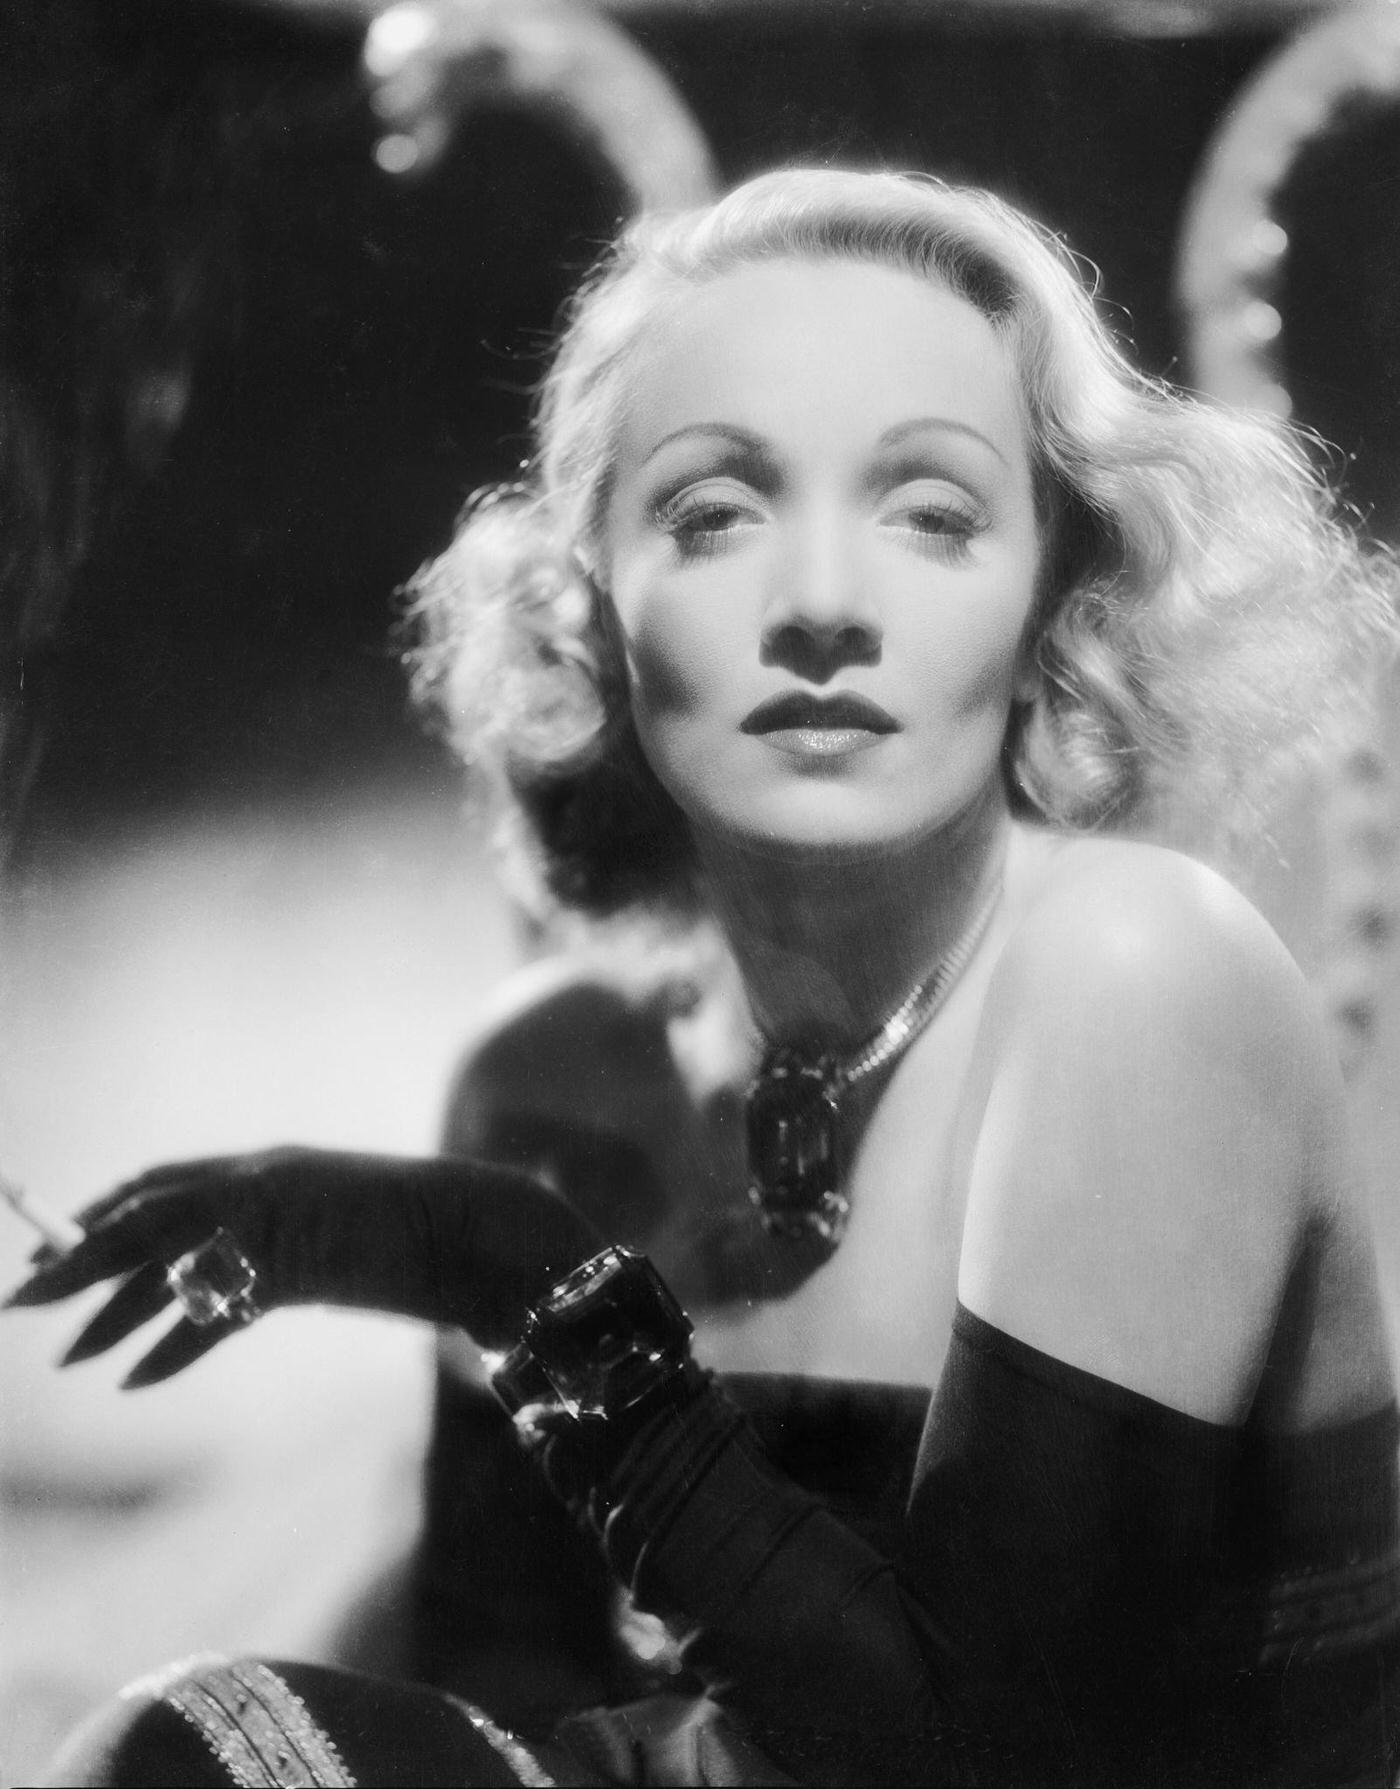 In the 1942 comedy 'The Lady is Willing,' Marlene Dietrich wears a matching set of ostentatious jewelry in the role of Elizabeth Madden.